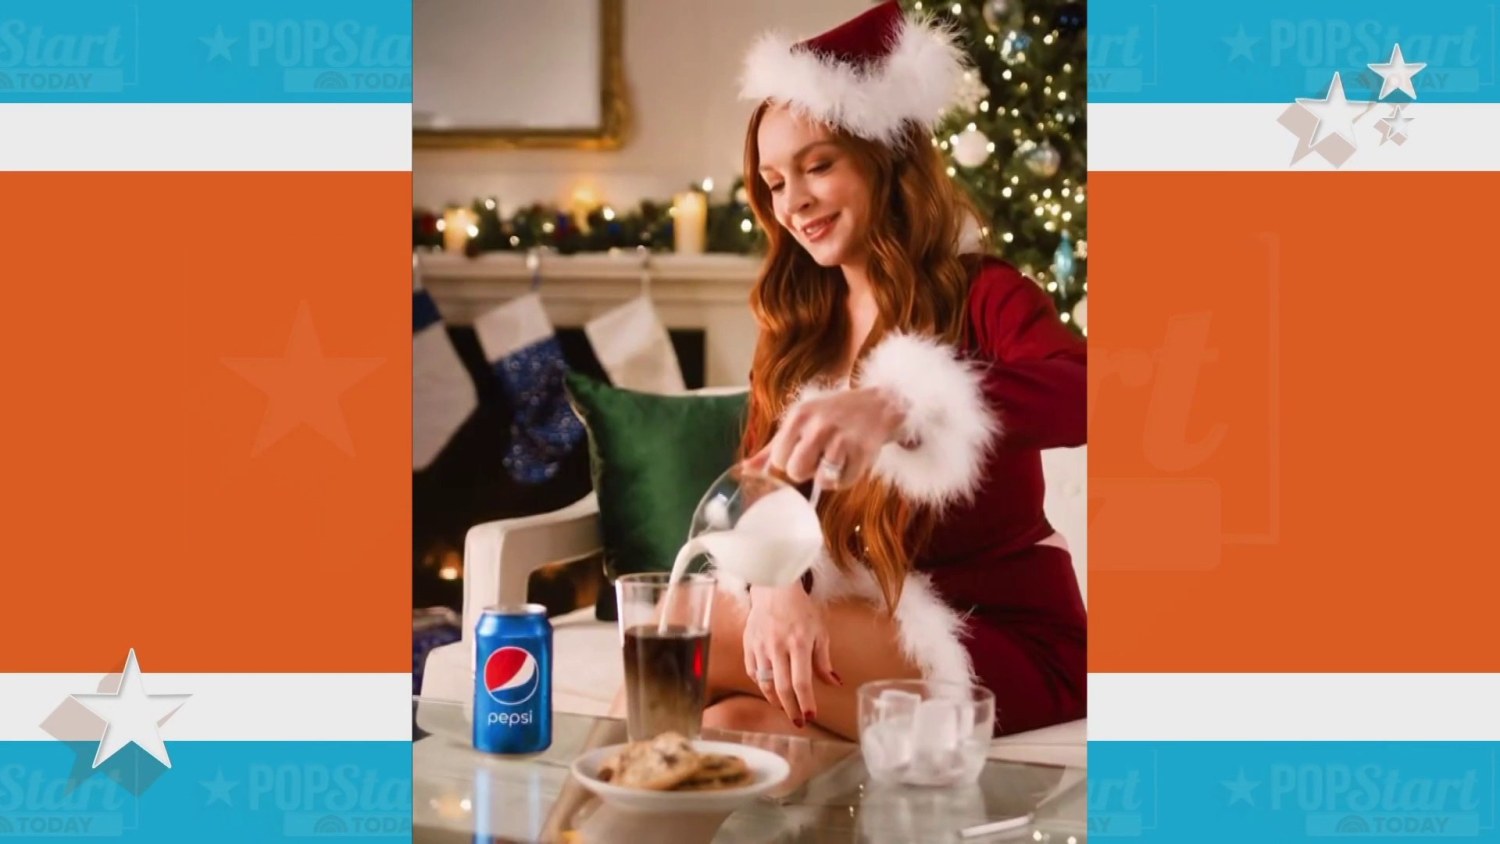 Lindsay Lohan Is Trying to Make Pepsi and Milk Happen